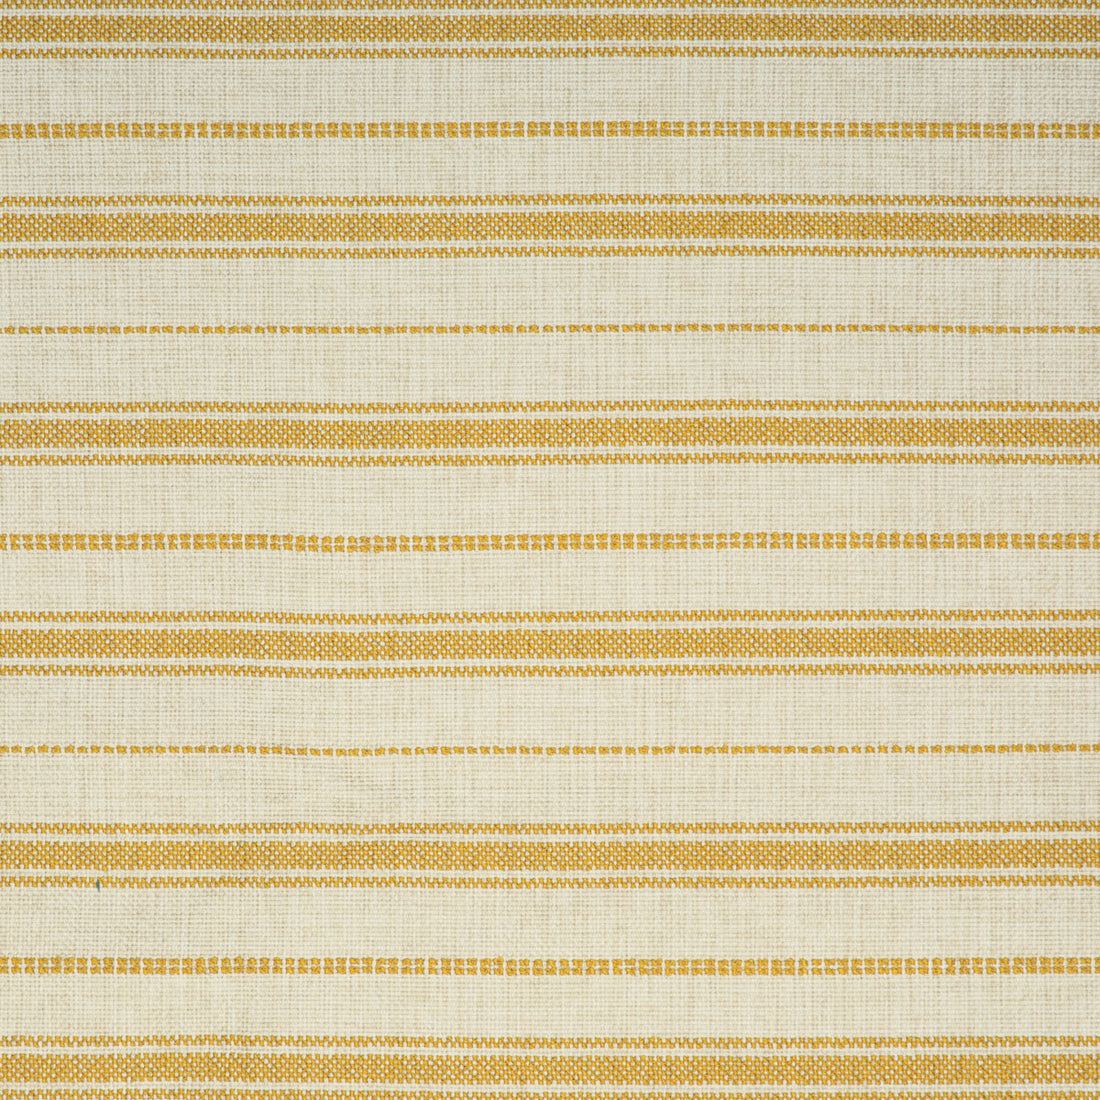 Montpezat Stripe fabric in gold color - pattern 8020136.4.0 - by Brunschwig &amp; Fils in the En Vacances II collection